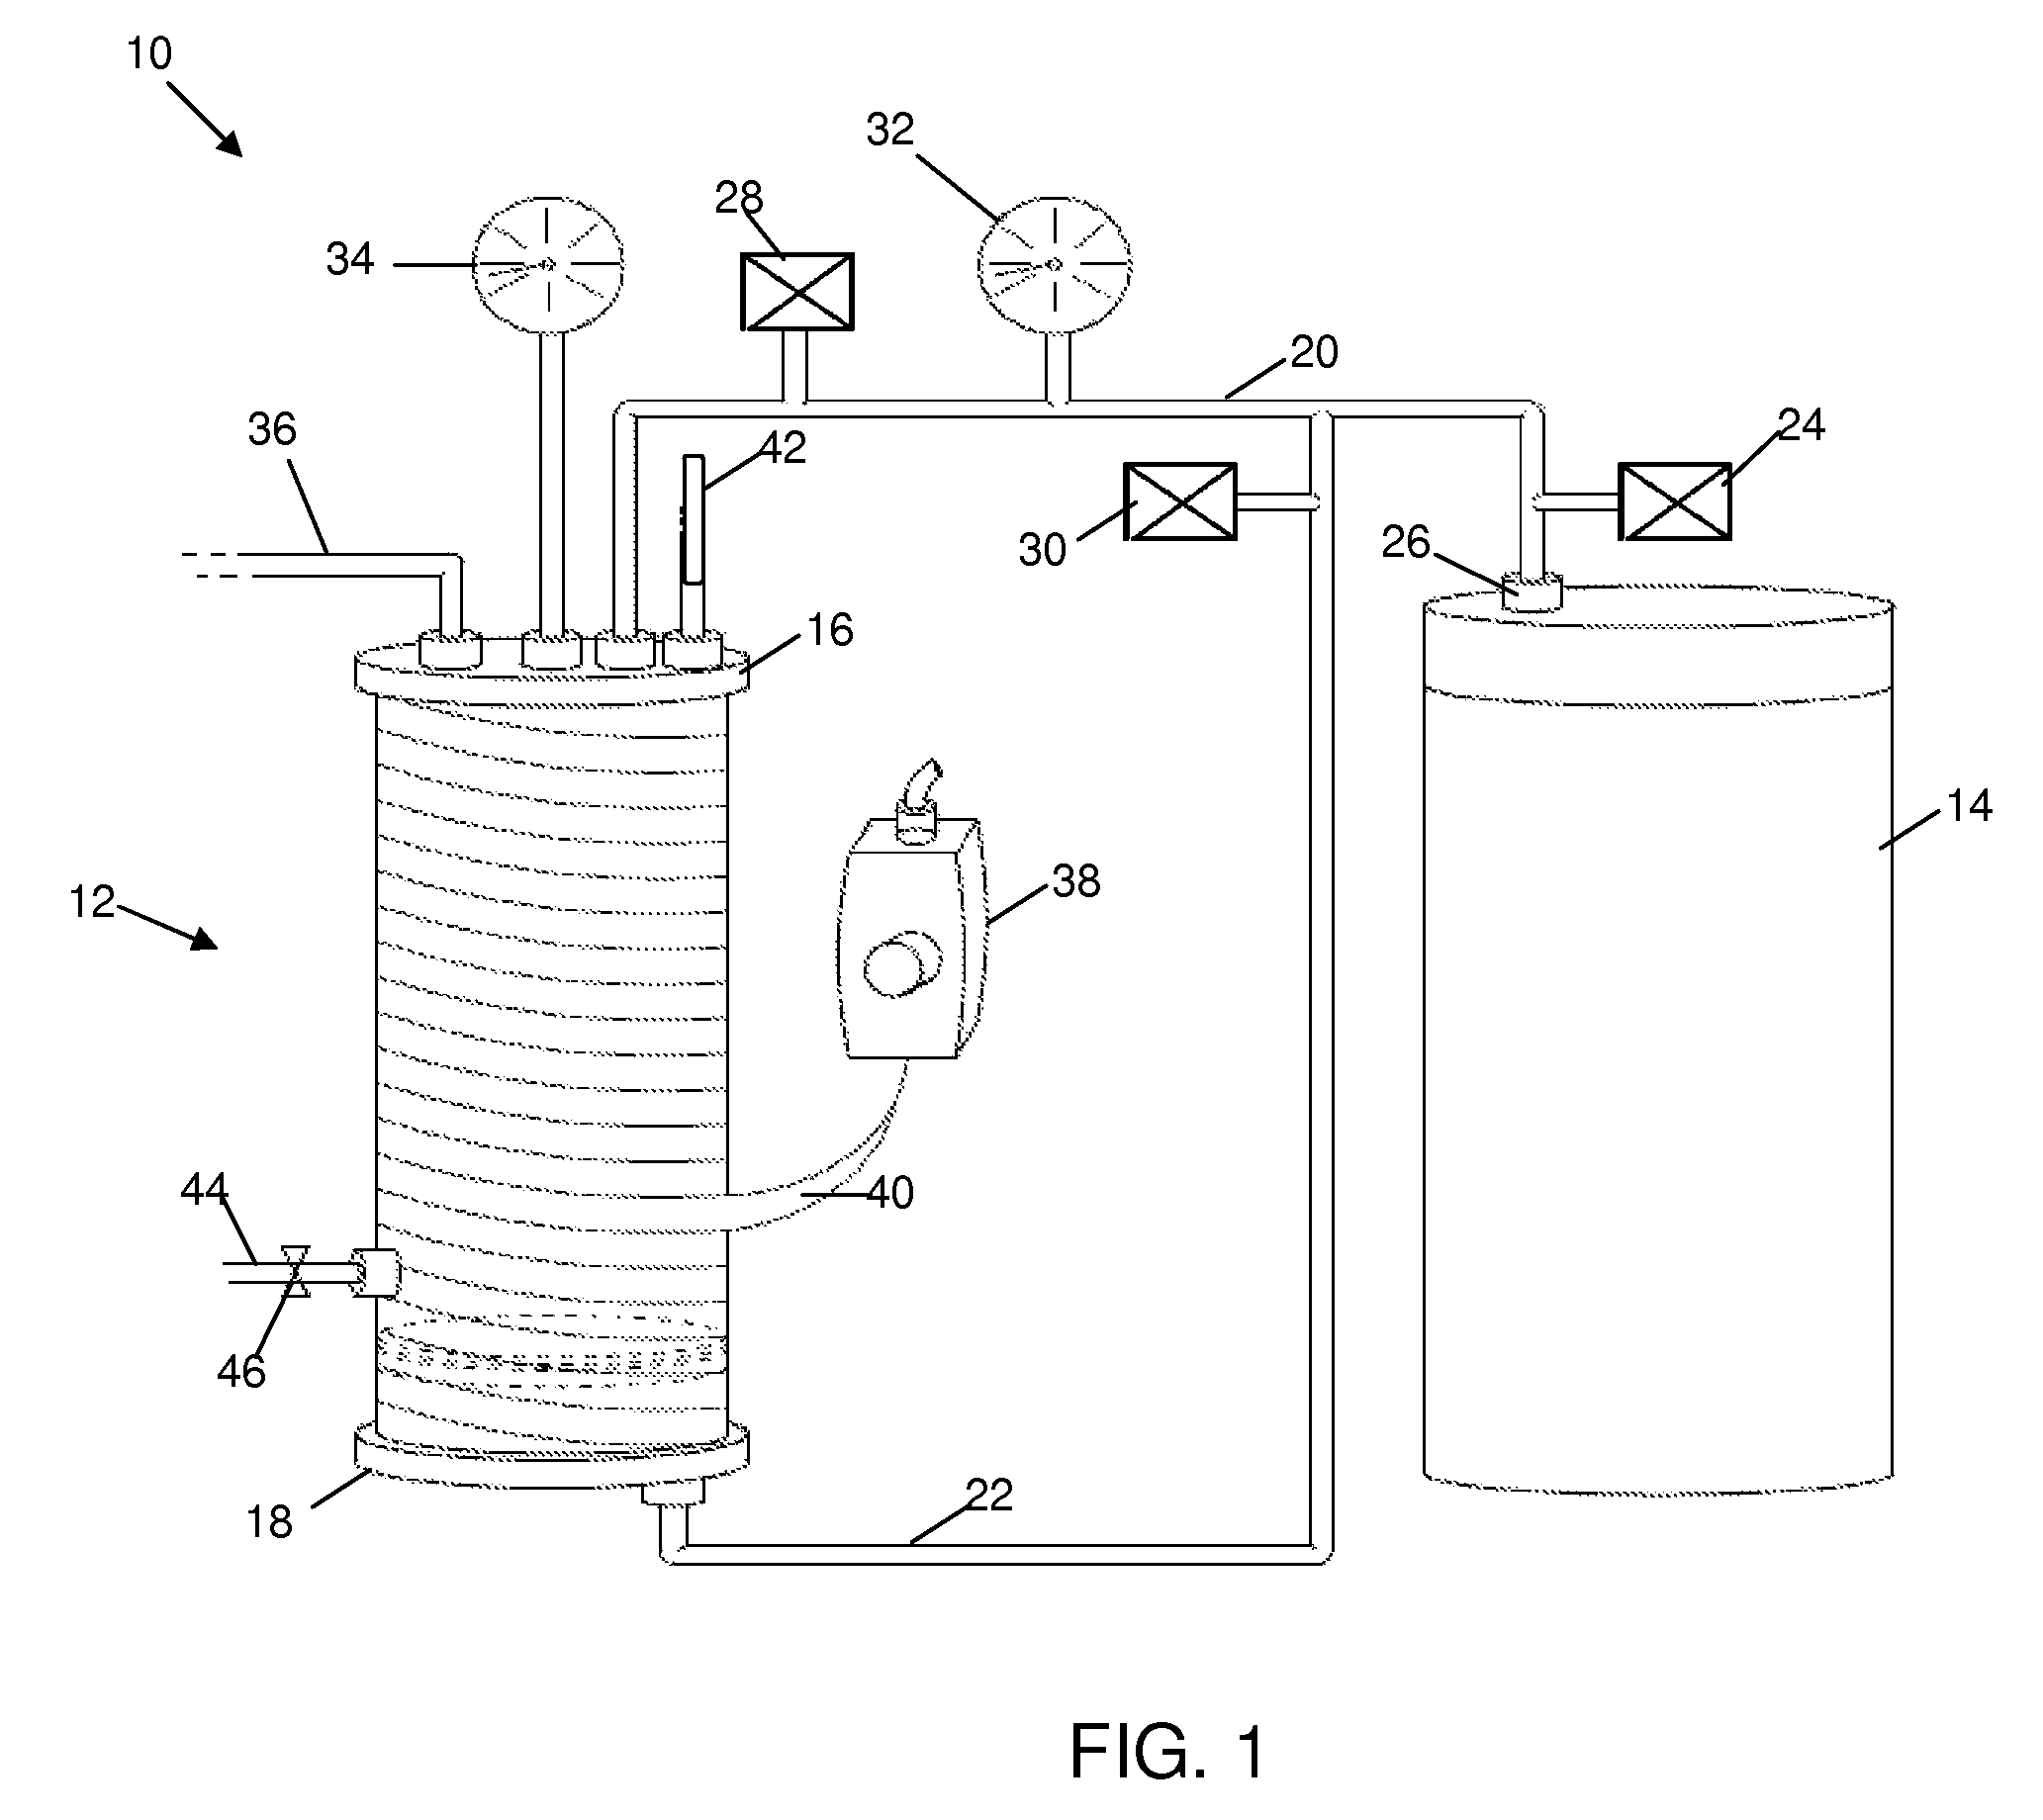 Process for testing a sample of hydraulic fracturing fluid